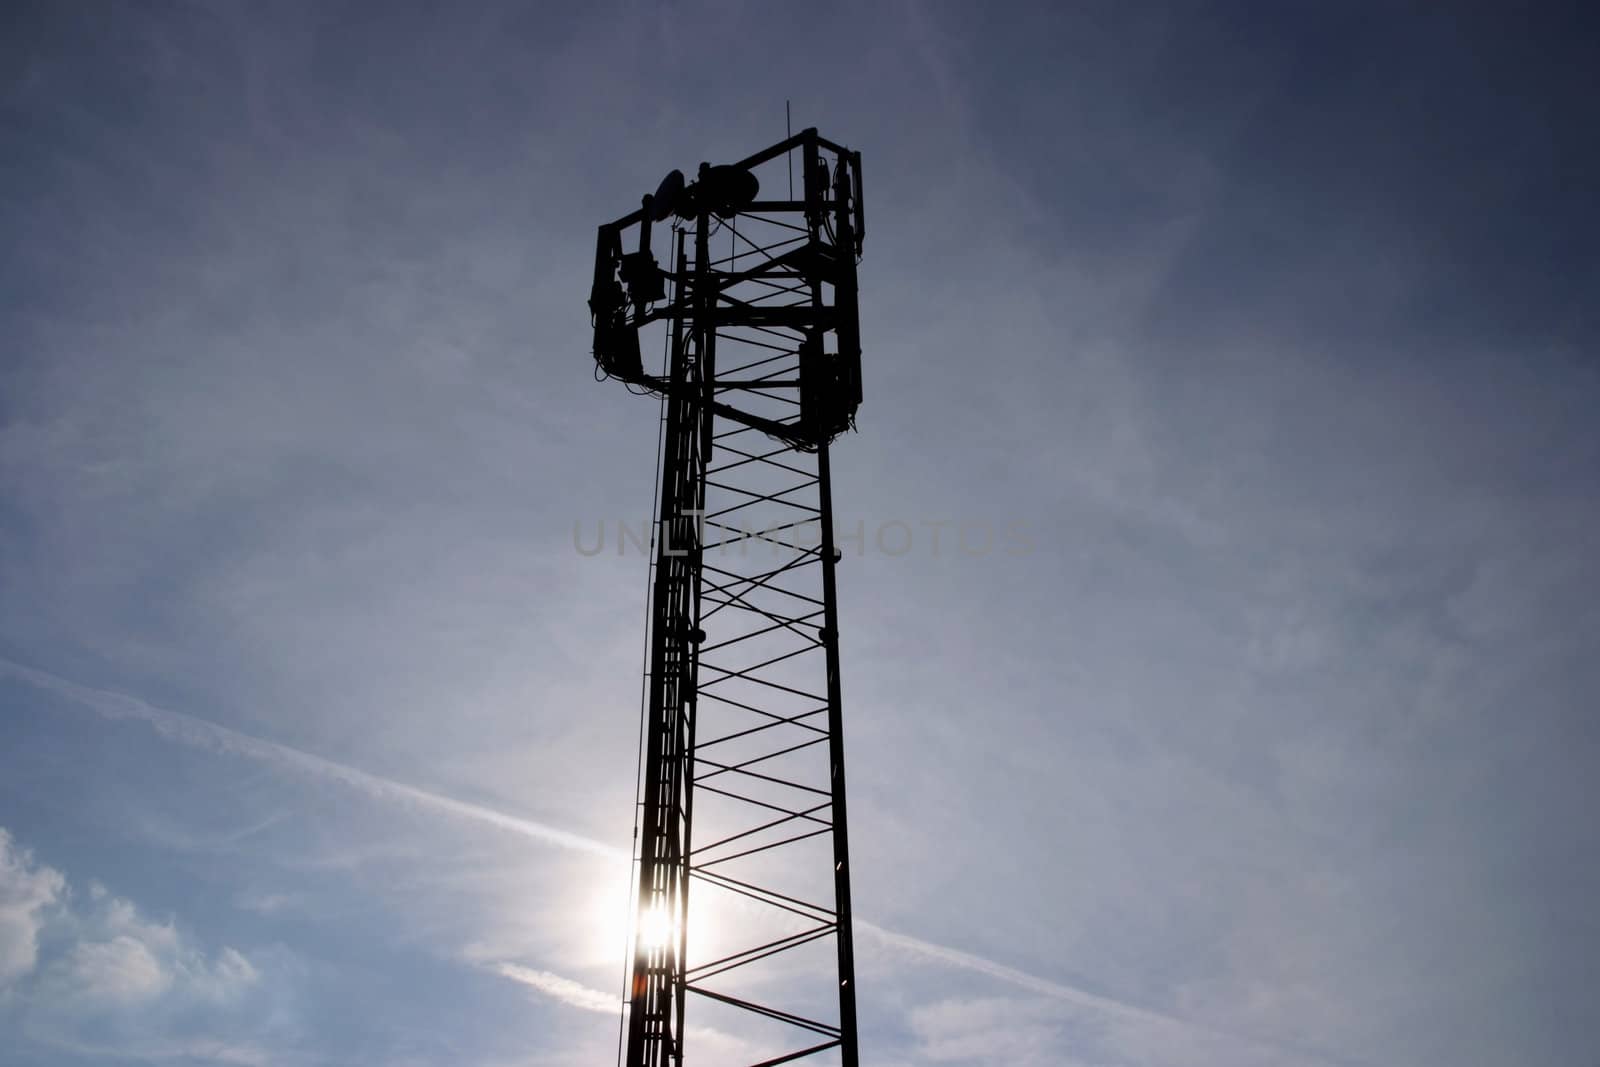 Telecommunication mast with a stormy sky background and the sun setting